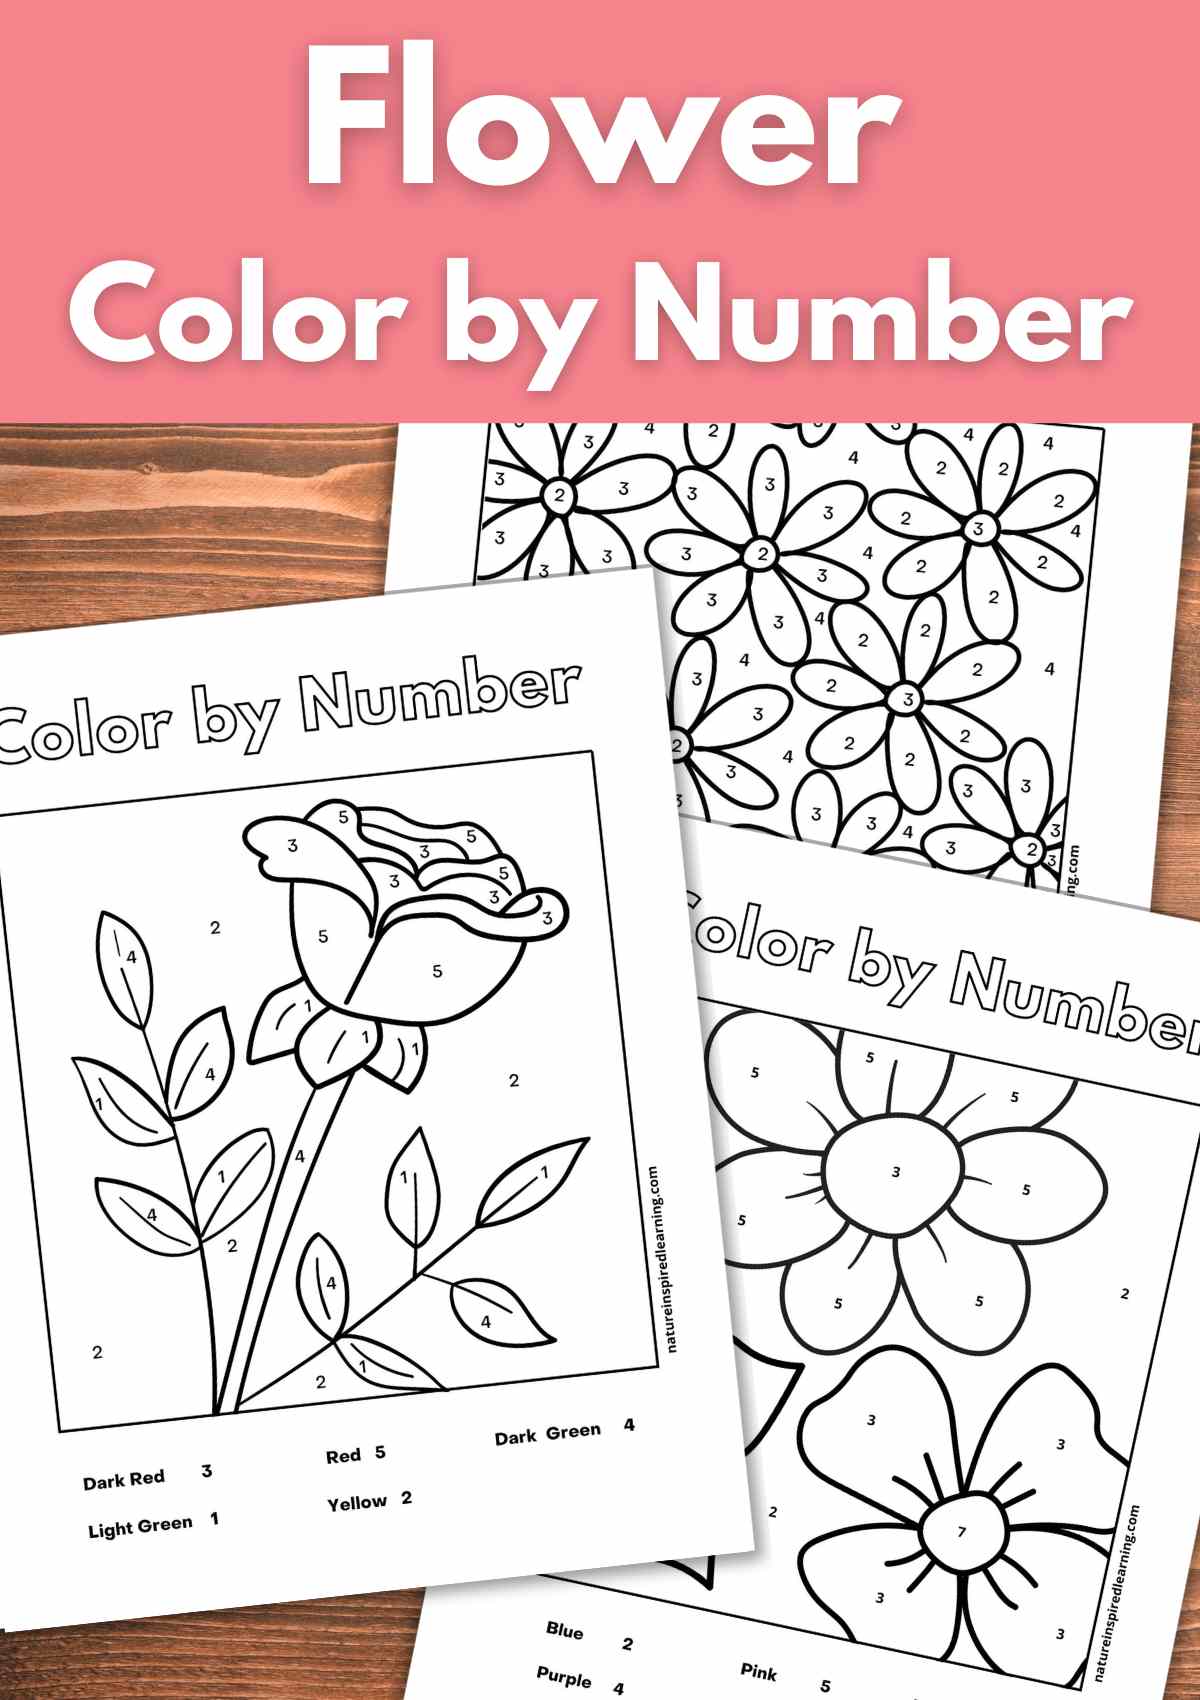 Flowers Color By Number for kids Ages 8-12 : Flower color by